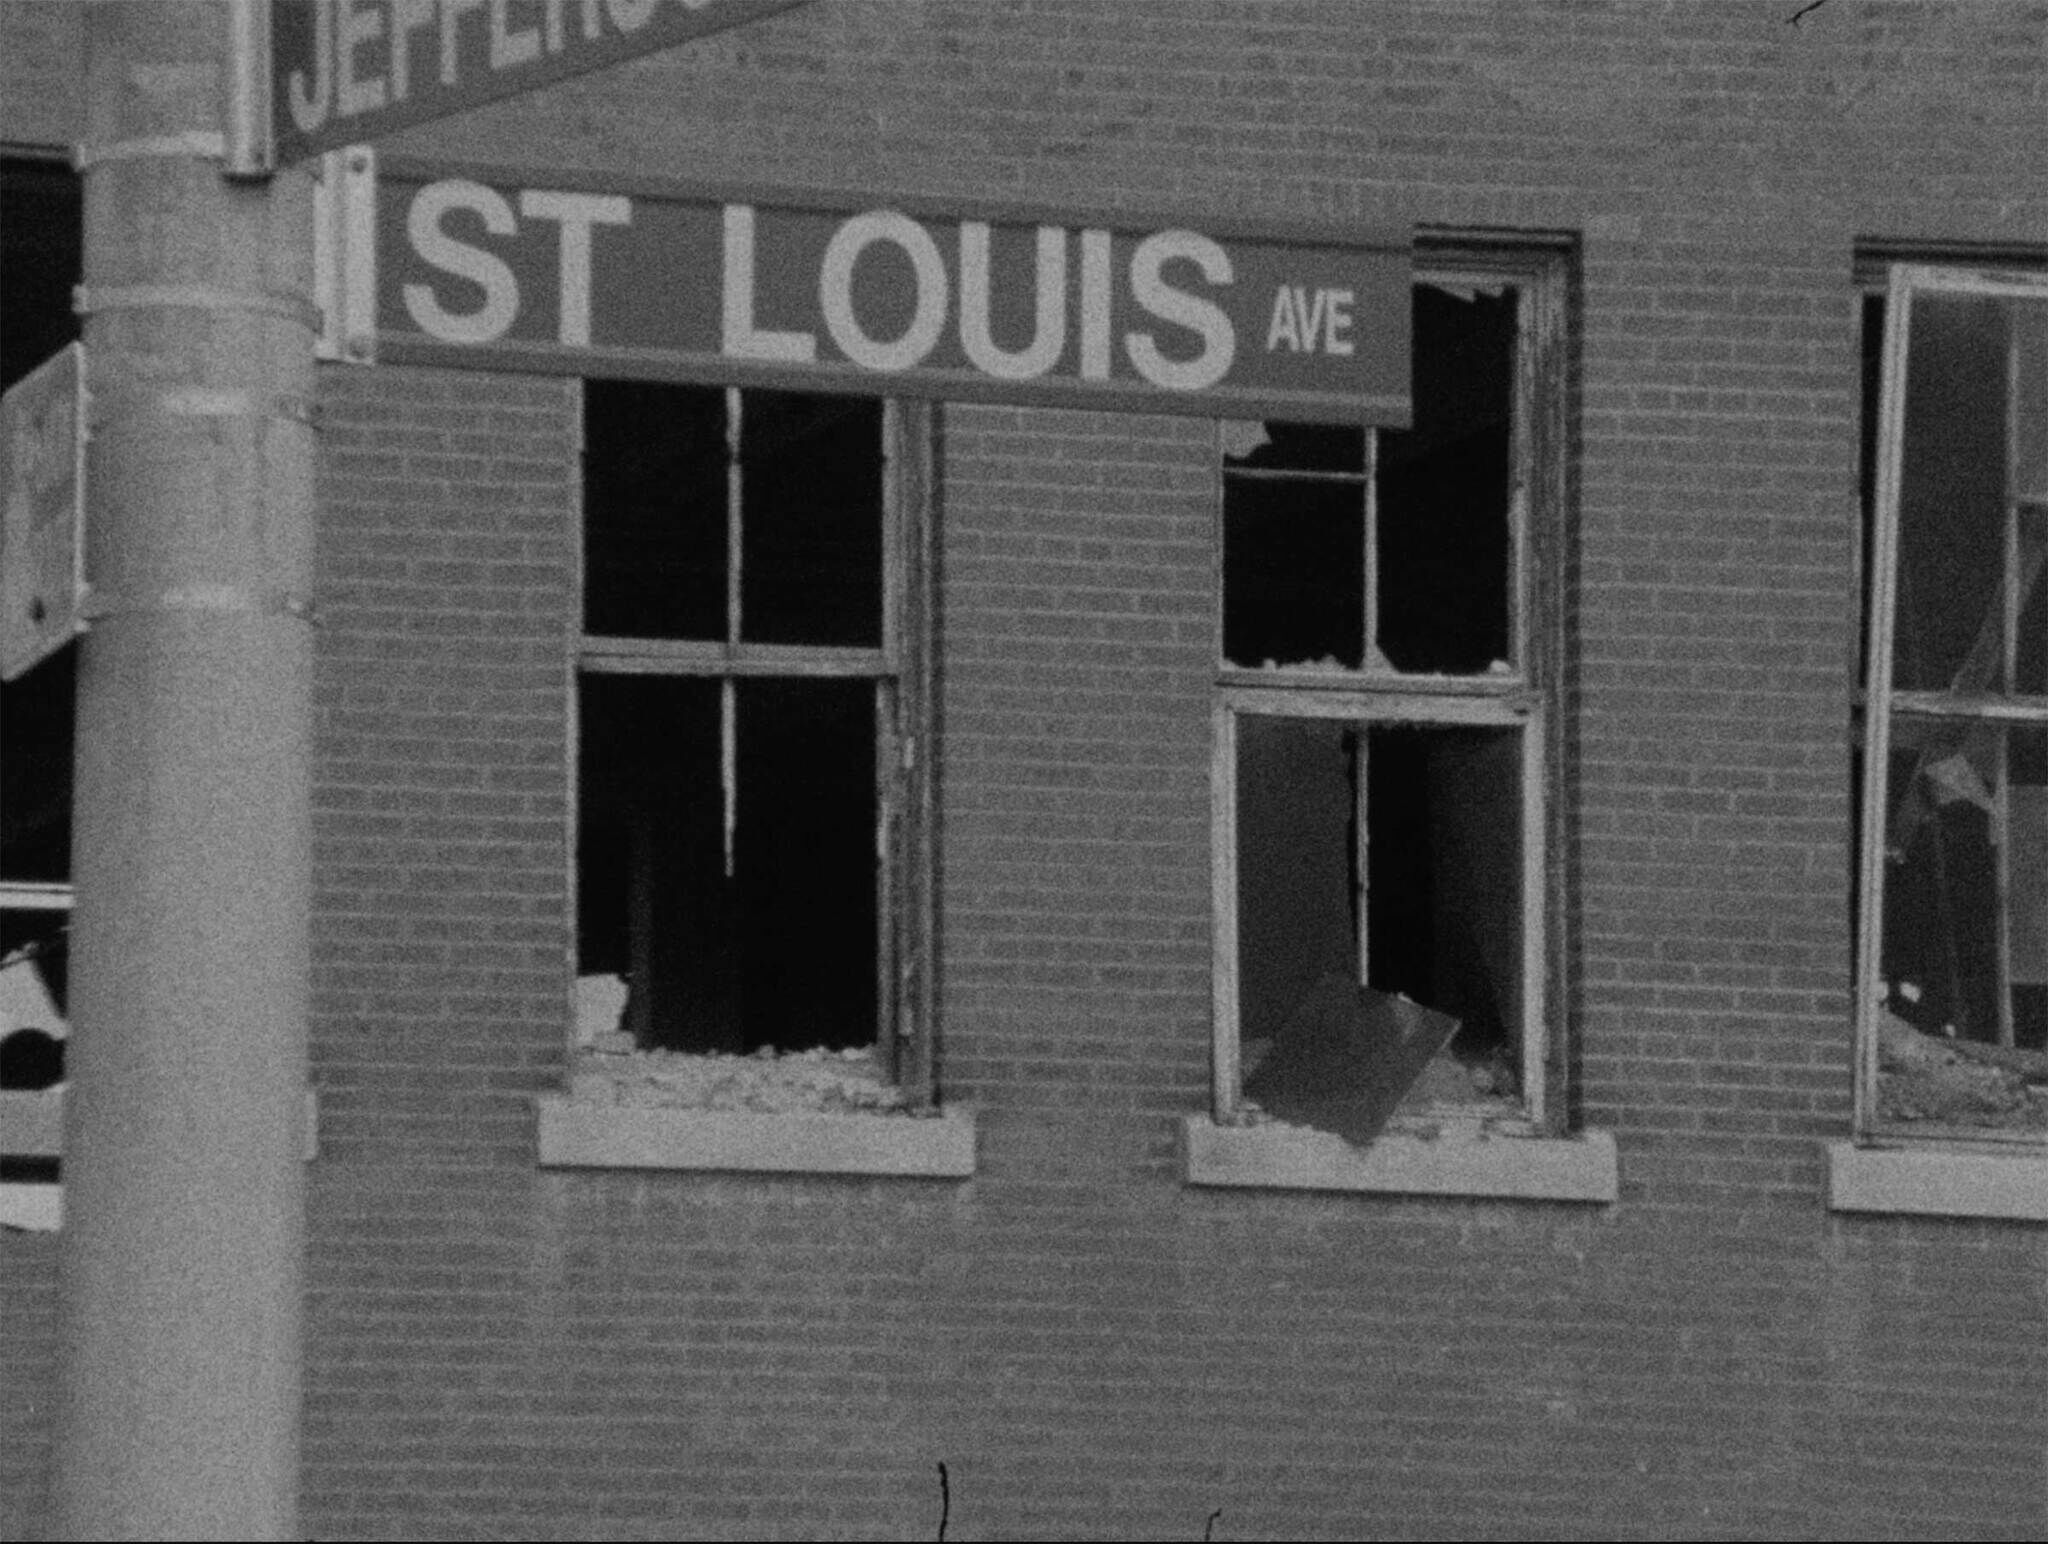 Black and white photo of a building corner with "ST LOUIS AVE" sign and broken windows.